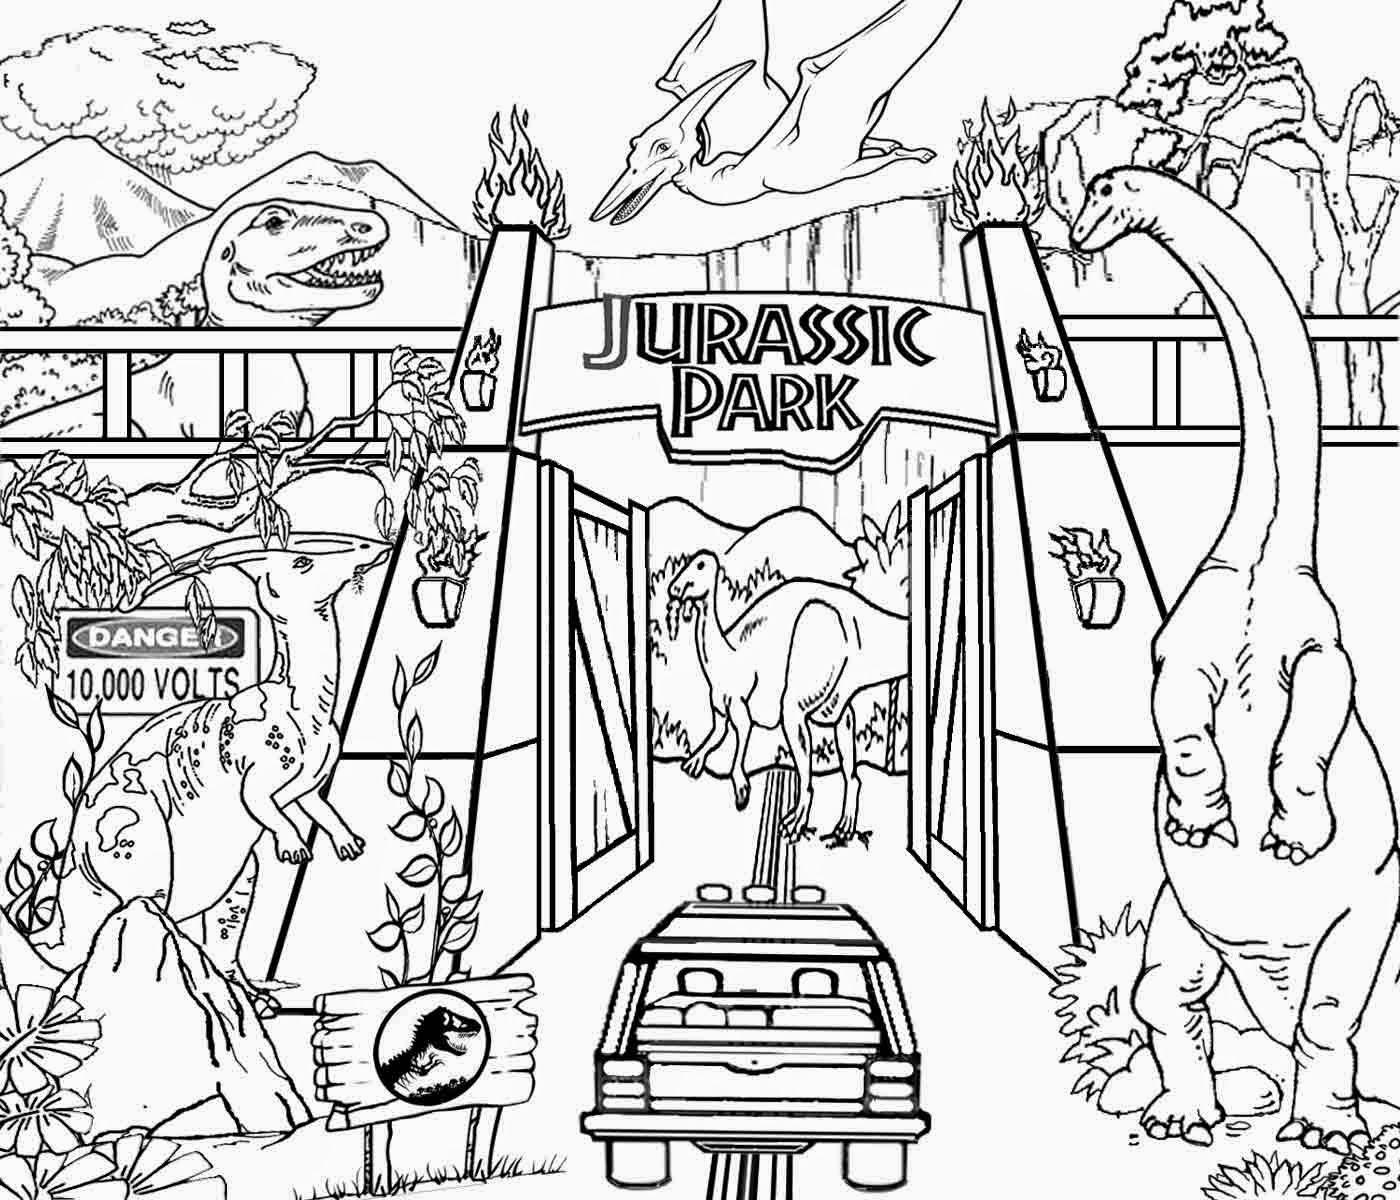 Jurassic Park Coloring Pages Printable Image